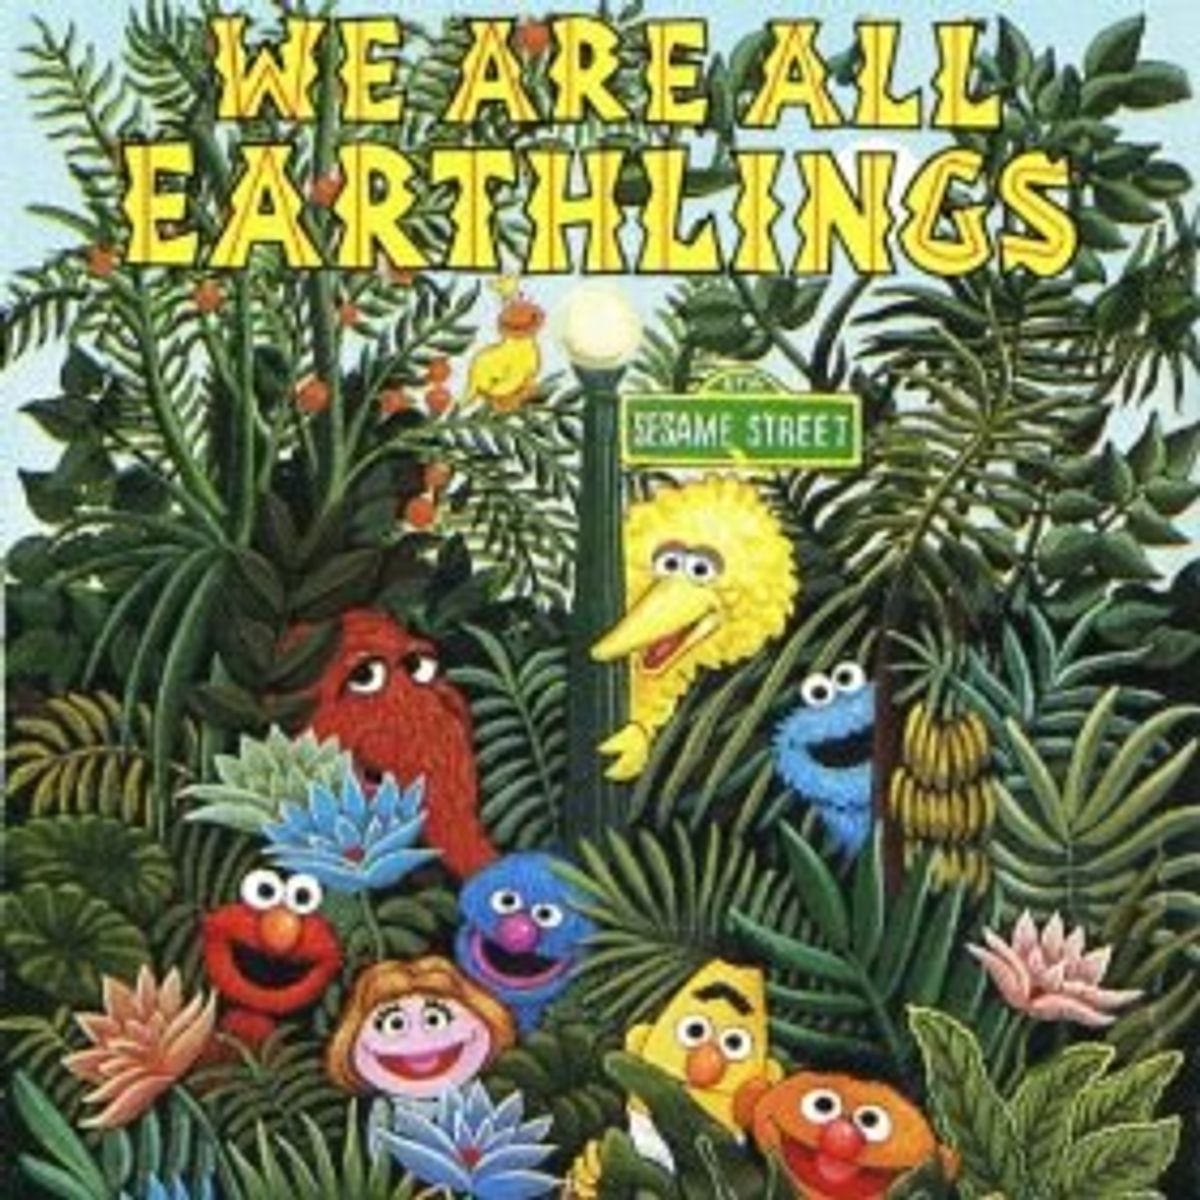 We Are All Earthlings